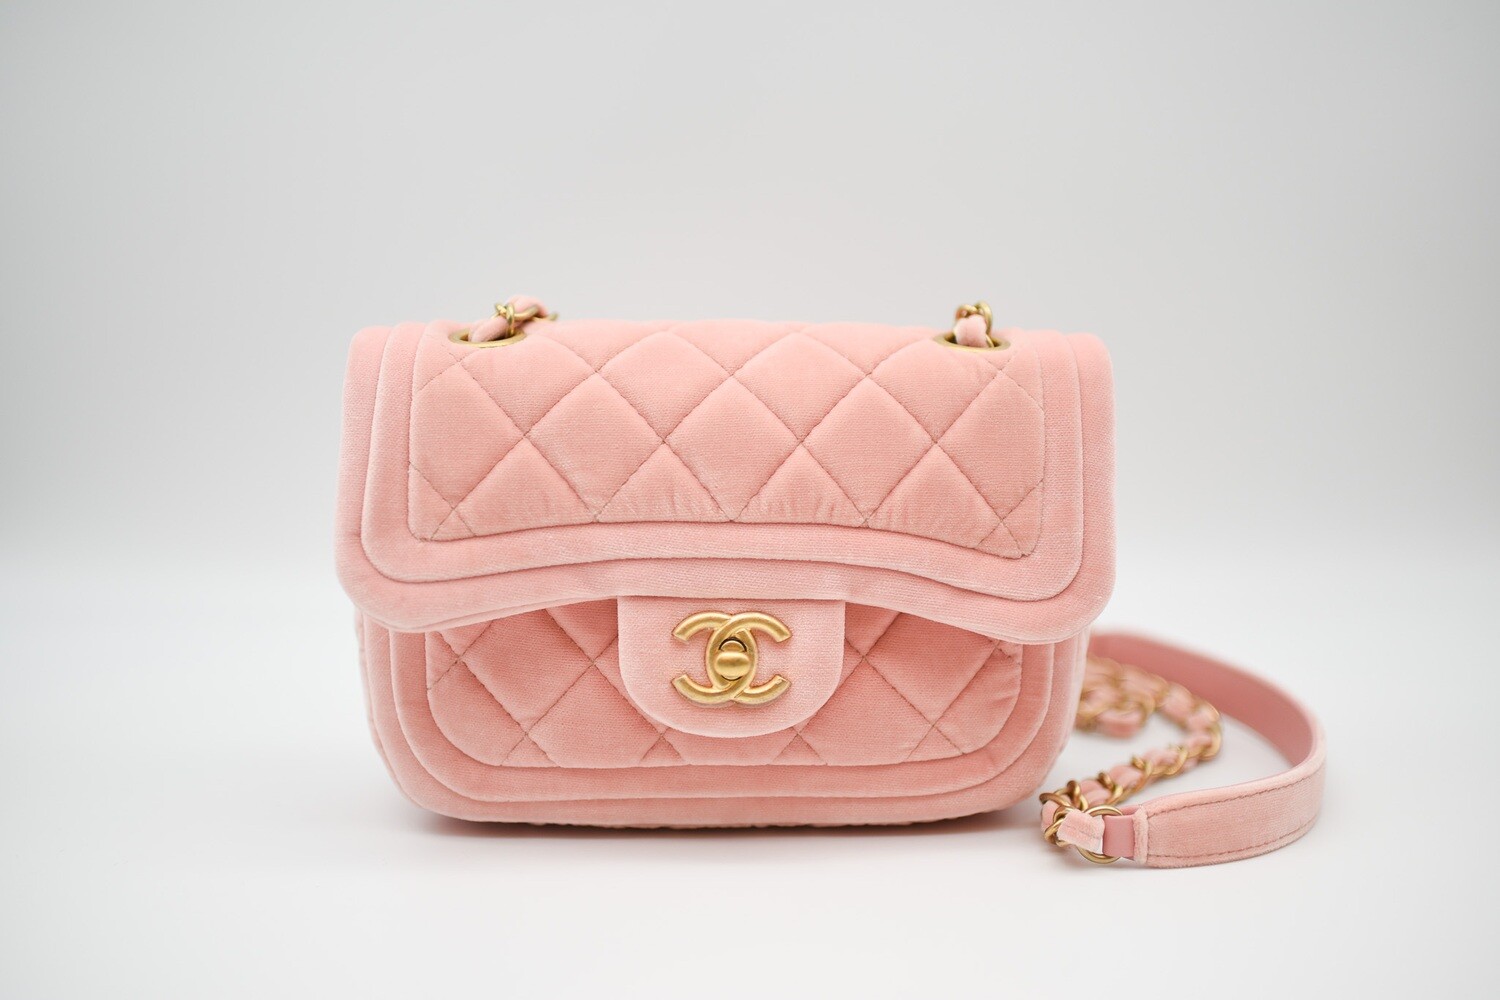 Chanel Seasonal Flap, Pink Velvet with Gold Hardware, New in Box